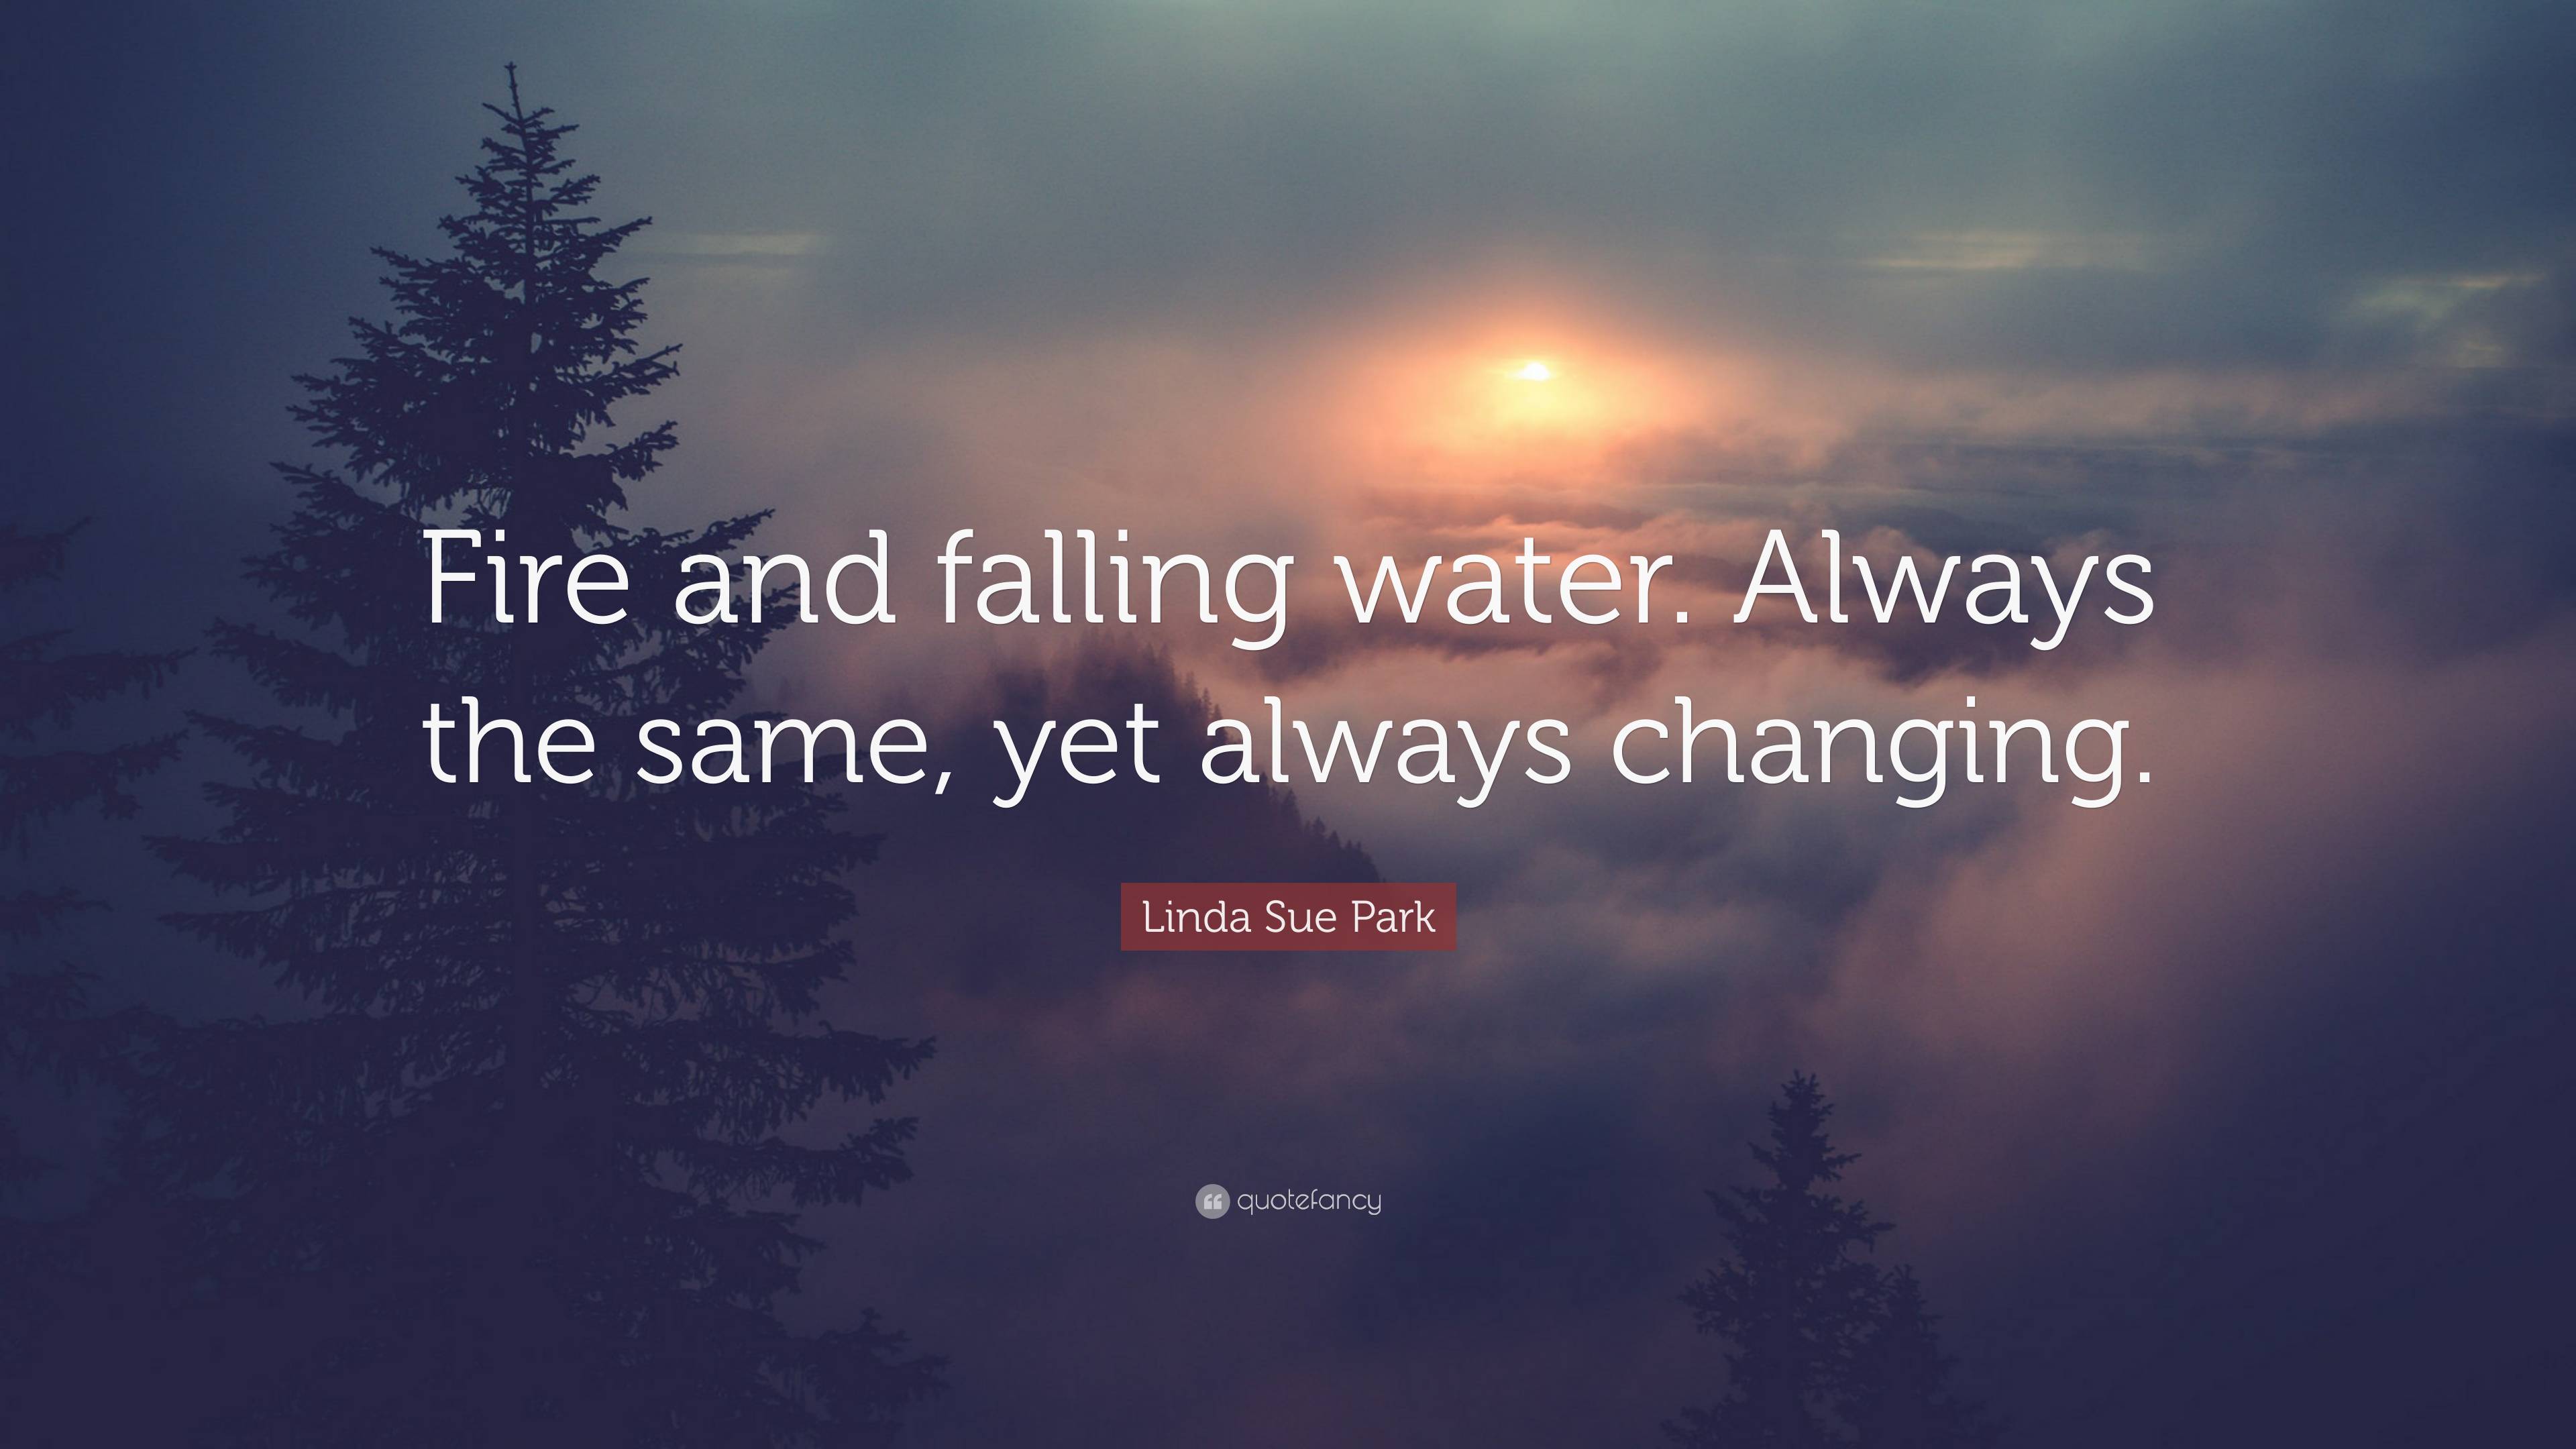 Linda Sue Park Quote: “Fire and falling water. Always the same, yet ...